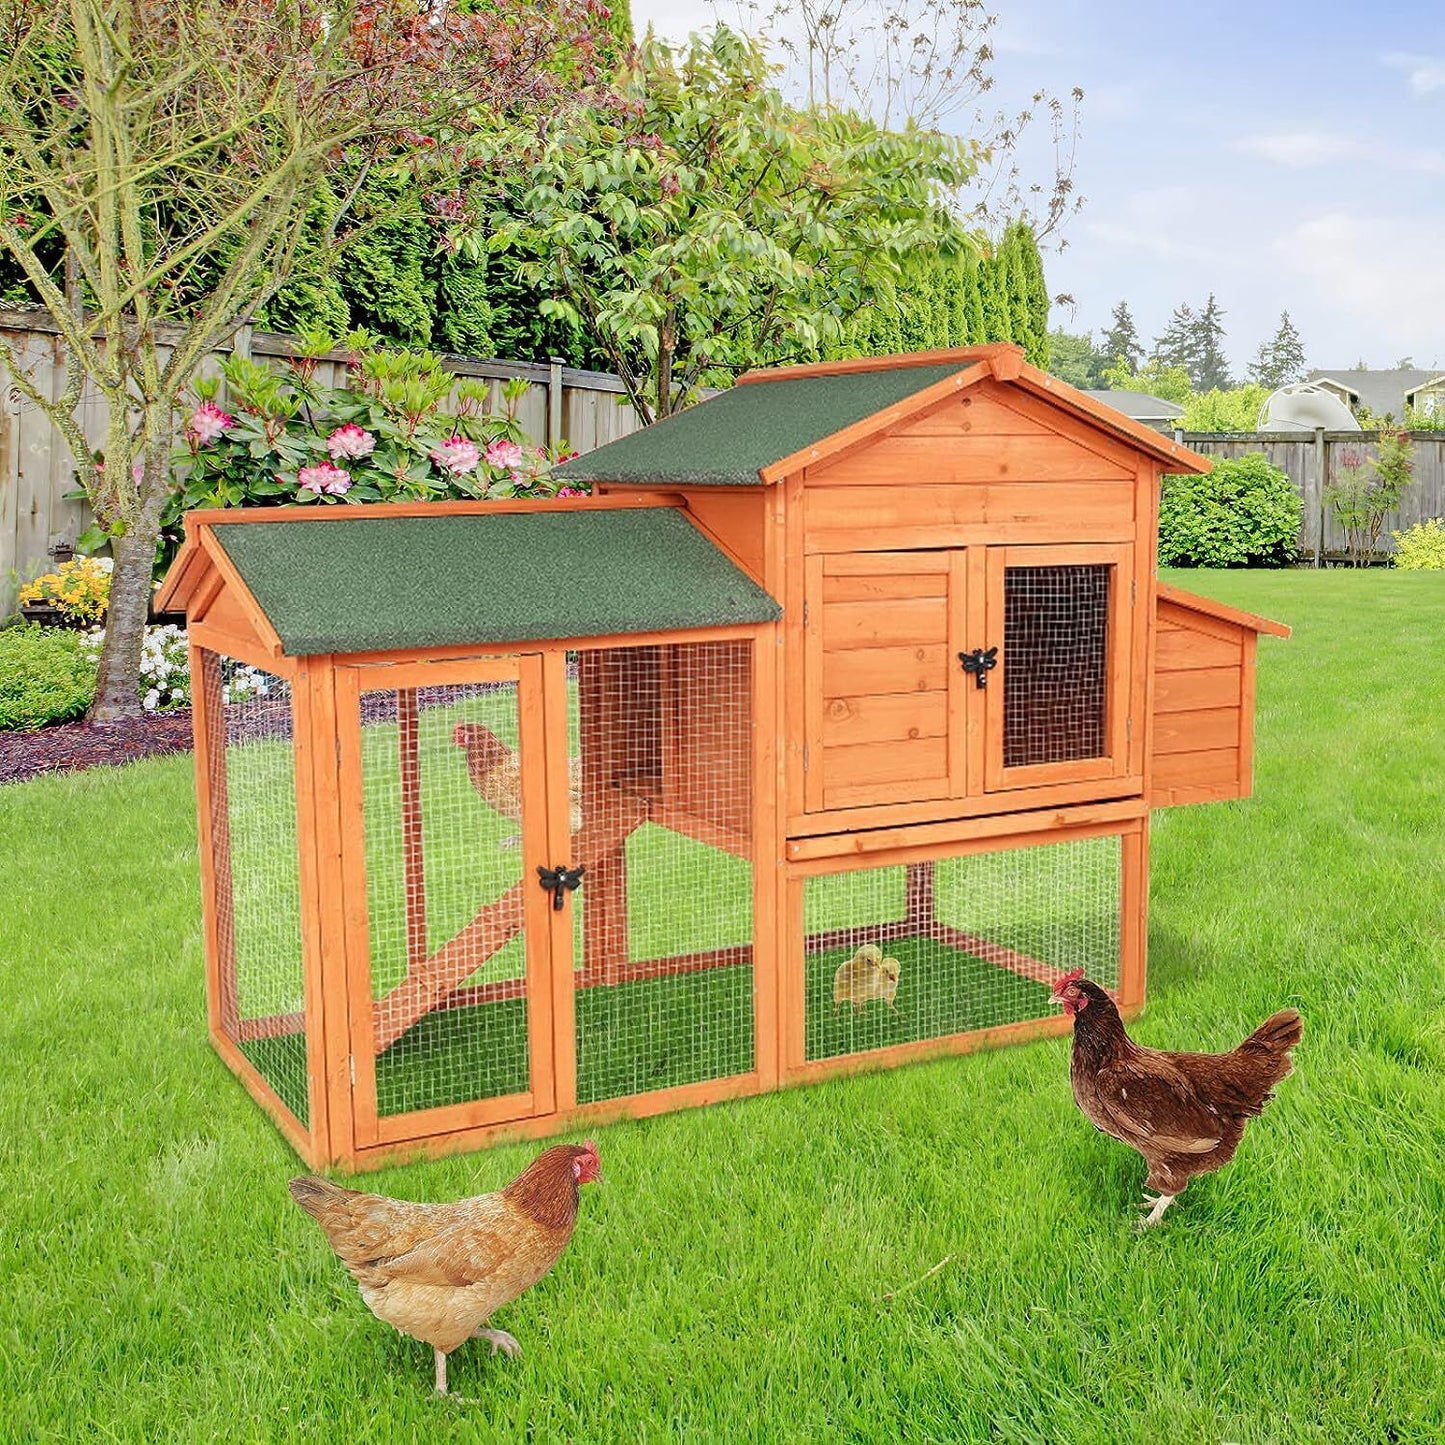 Arlopu 65" Chicken Coop, Outdoor Wooden Moveable Poultry Cage, Multi-Level Hen House w/Ramp, Run, Nesting Box, Removable Tray, Wire Fence&Weatherproof Asphalt roof, for Yard Farm Use, Chick & Rabbit